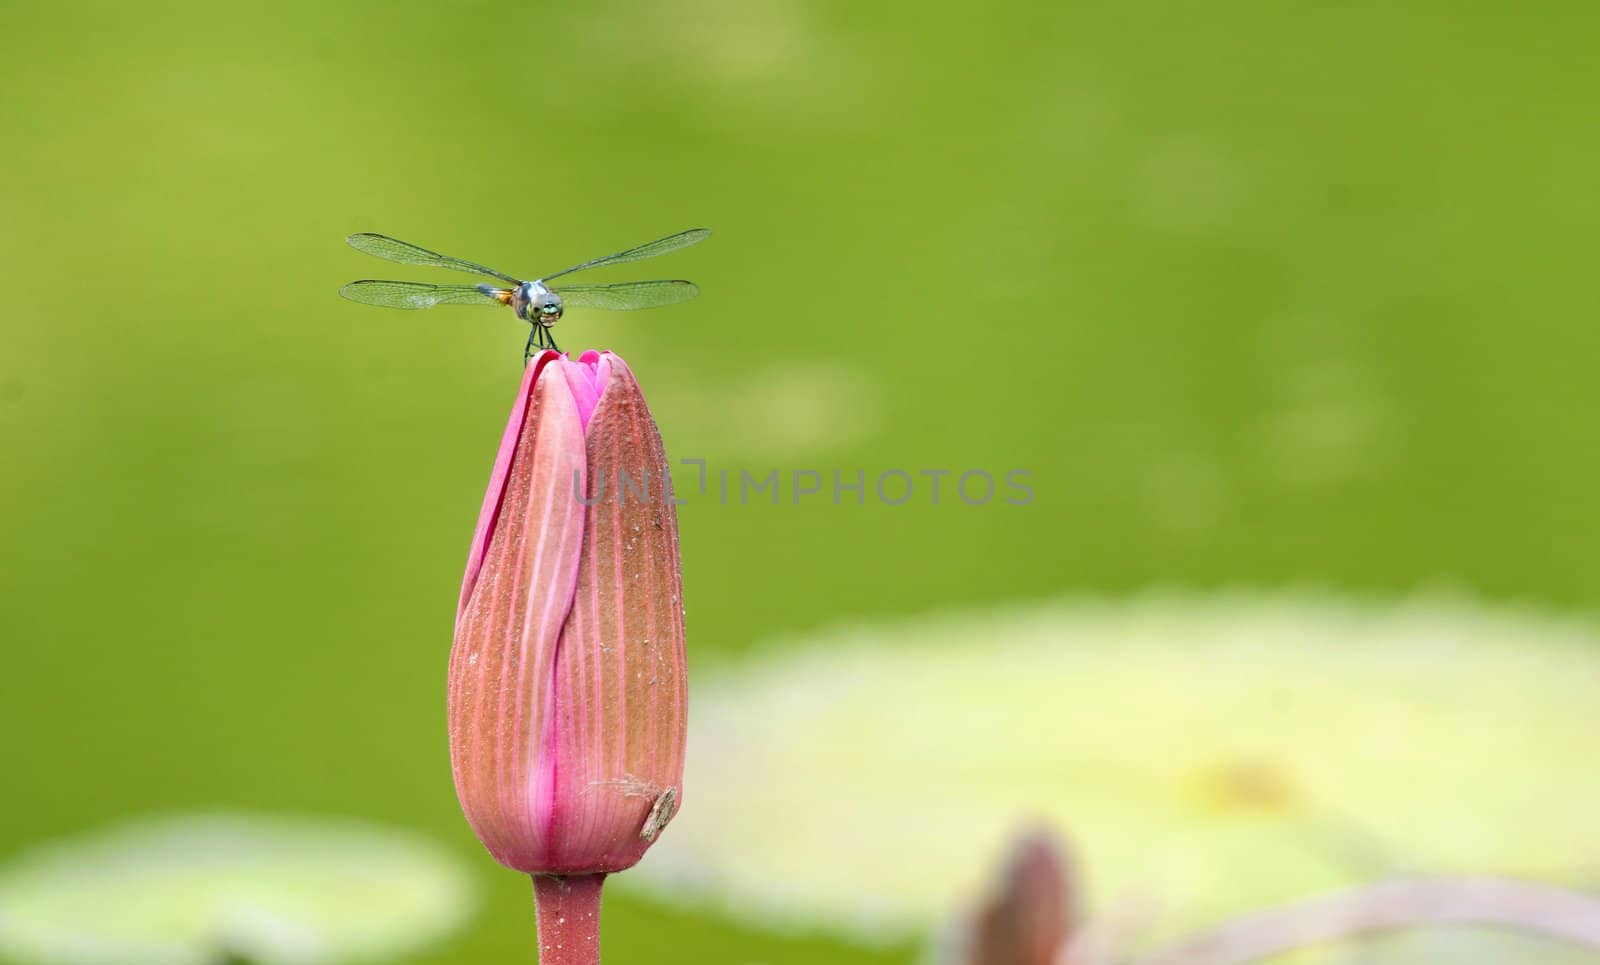 dragonfly on a lily flower by clearviewstock